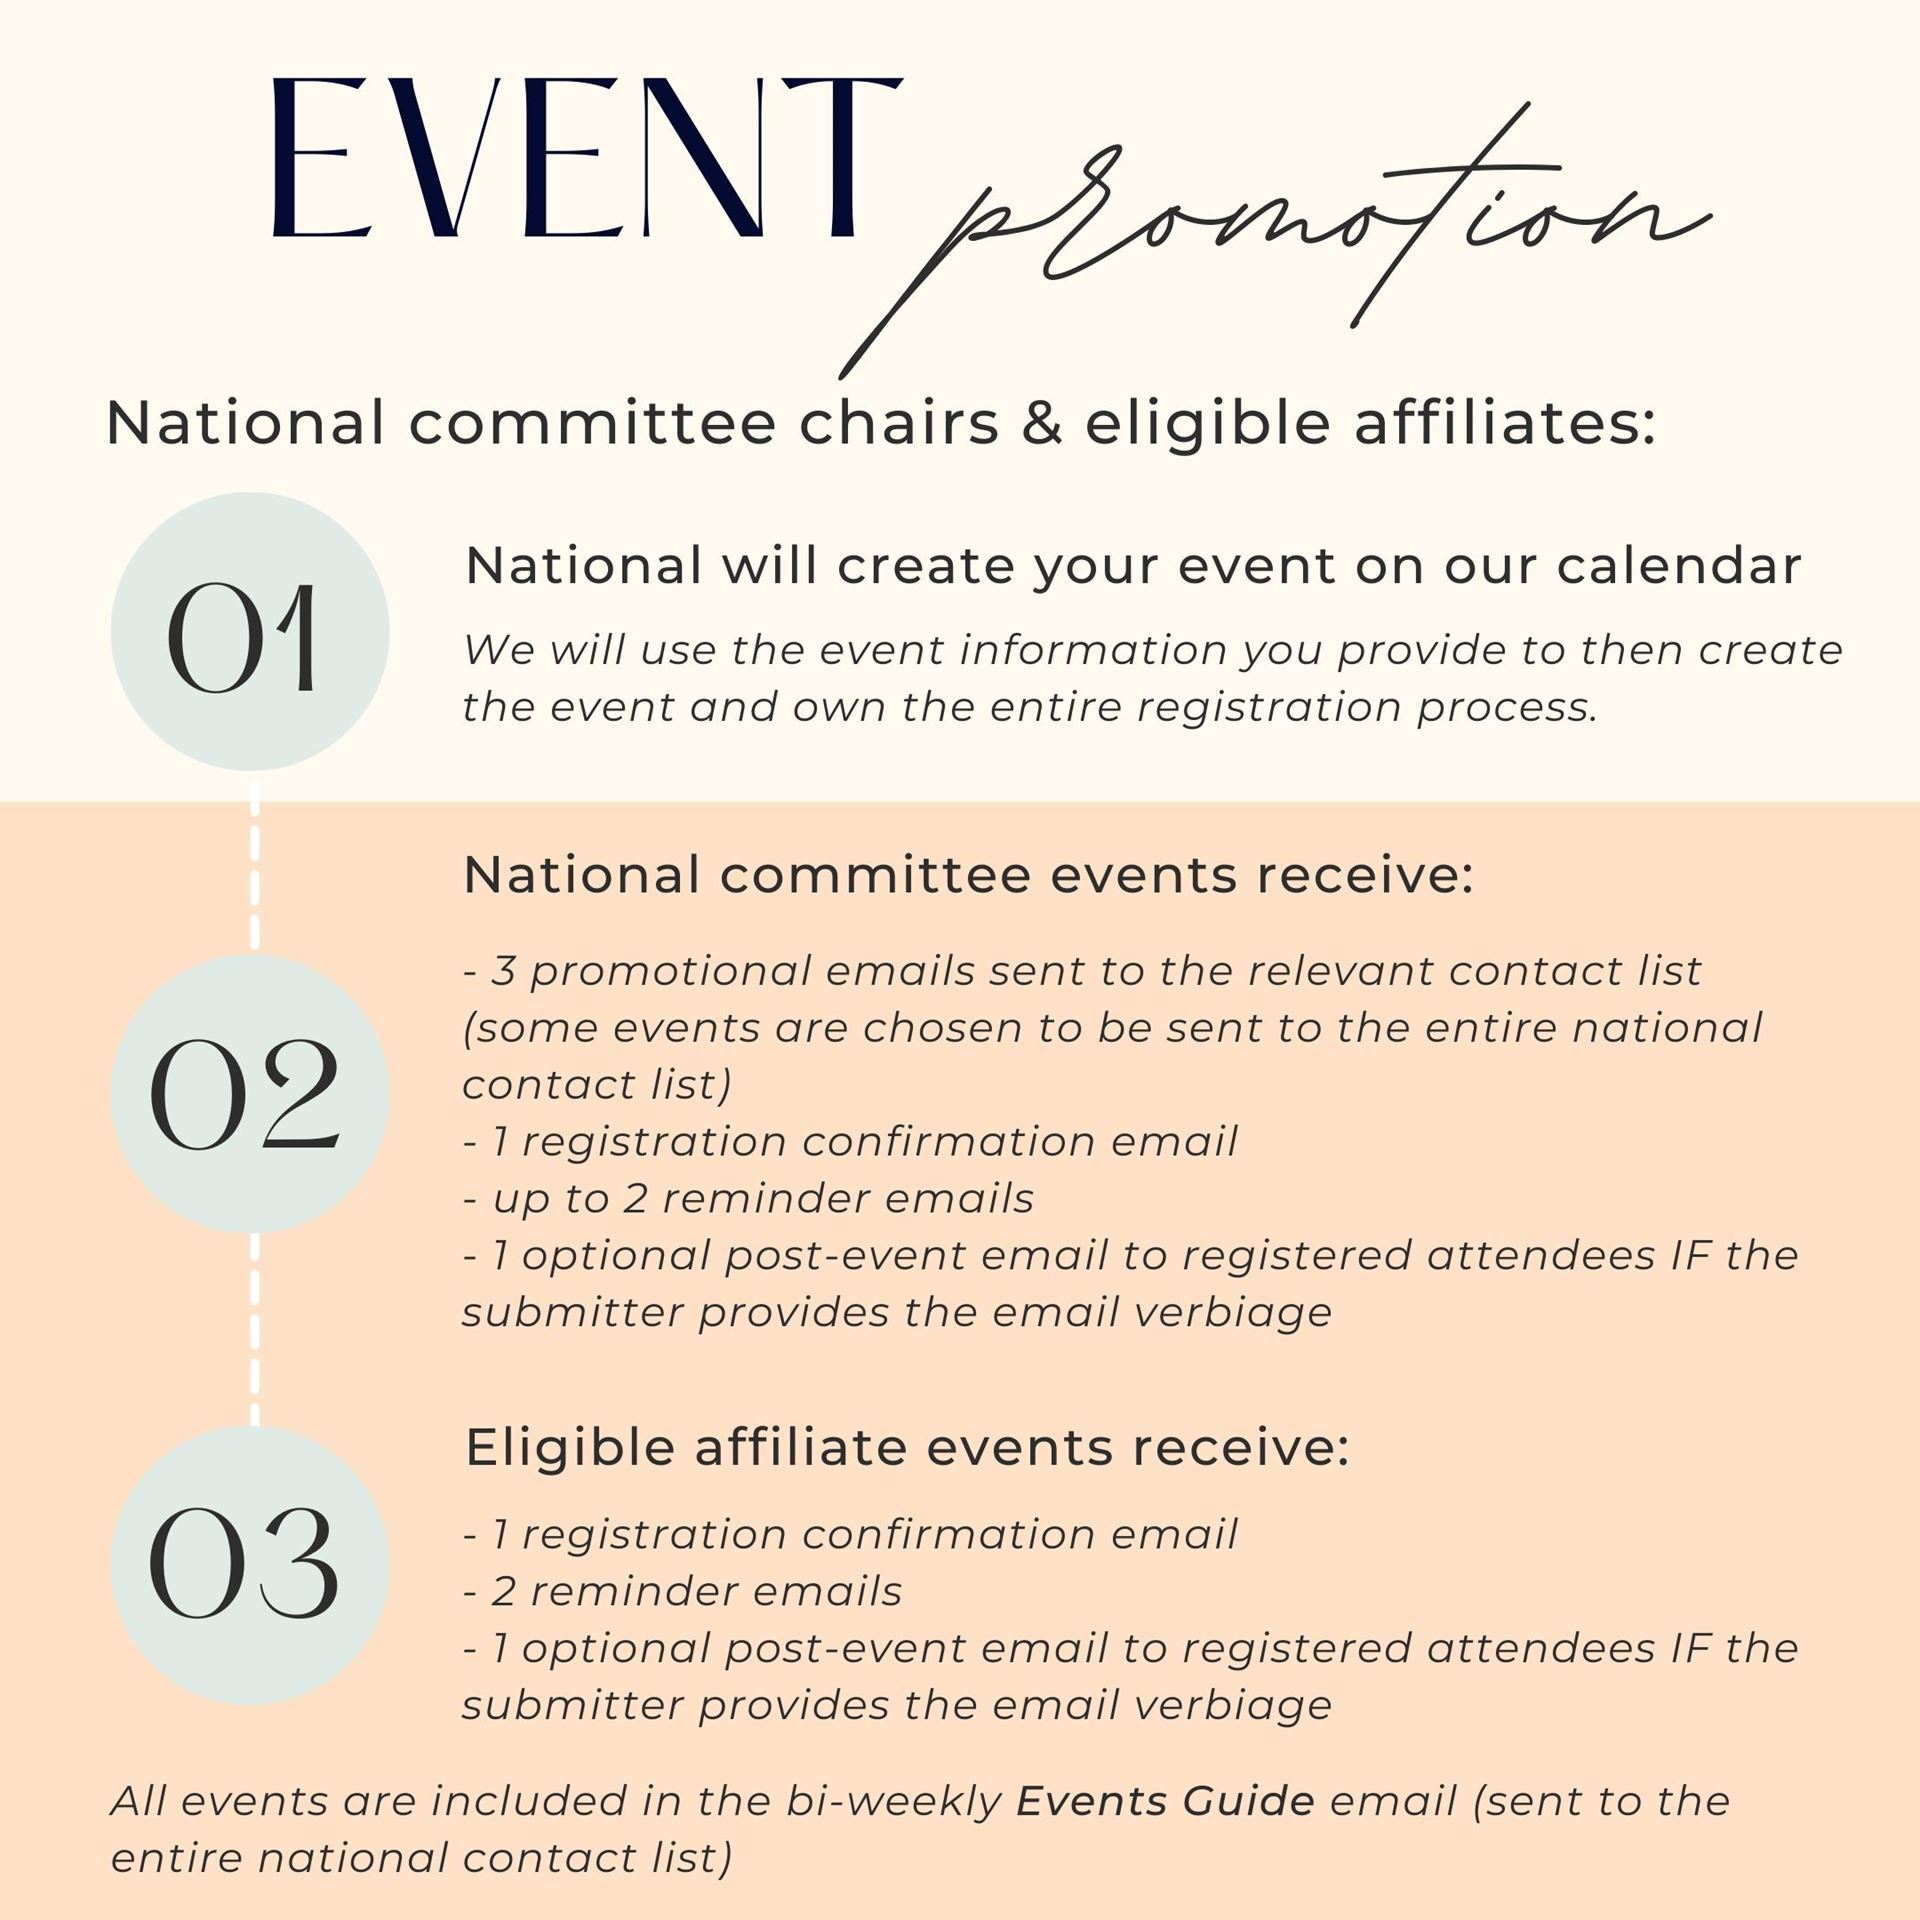 National committee event process